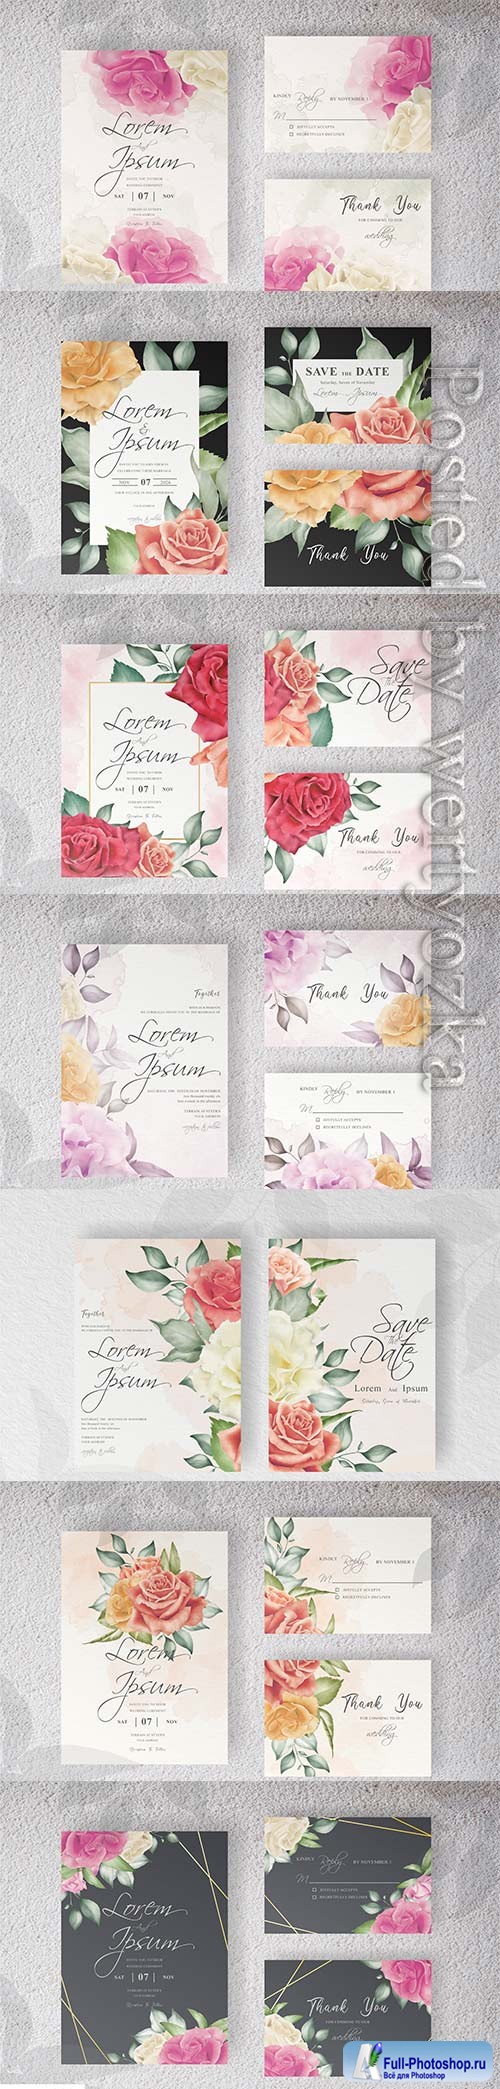 Wedding invitation with beautiful floral and watercolor